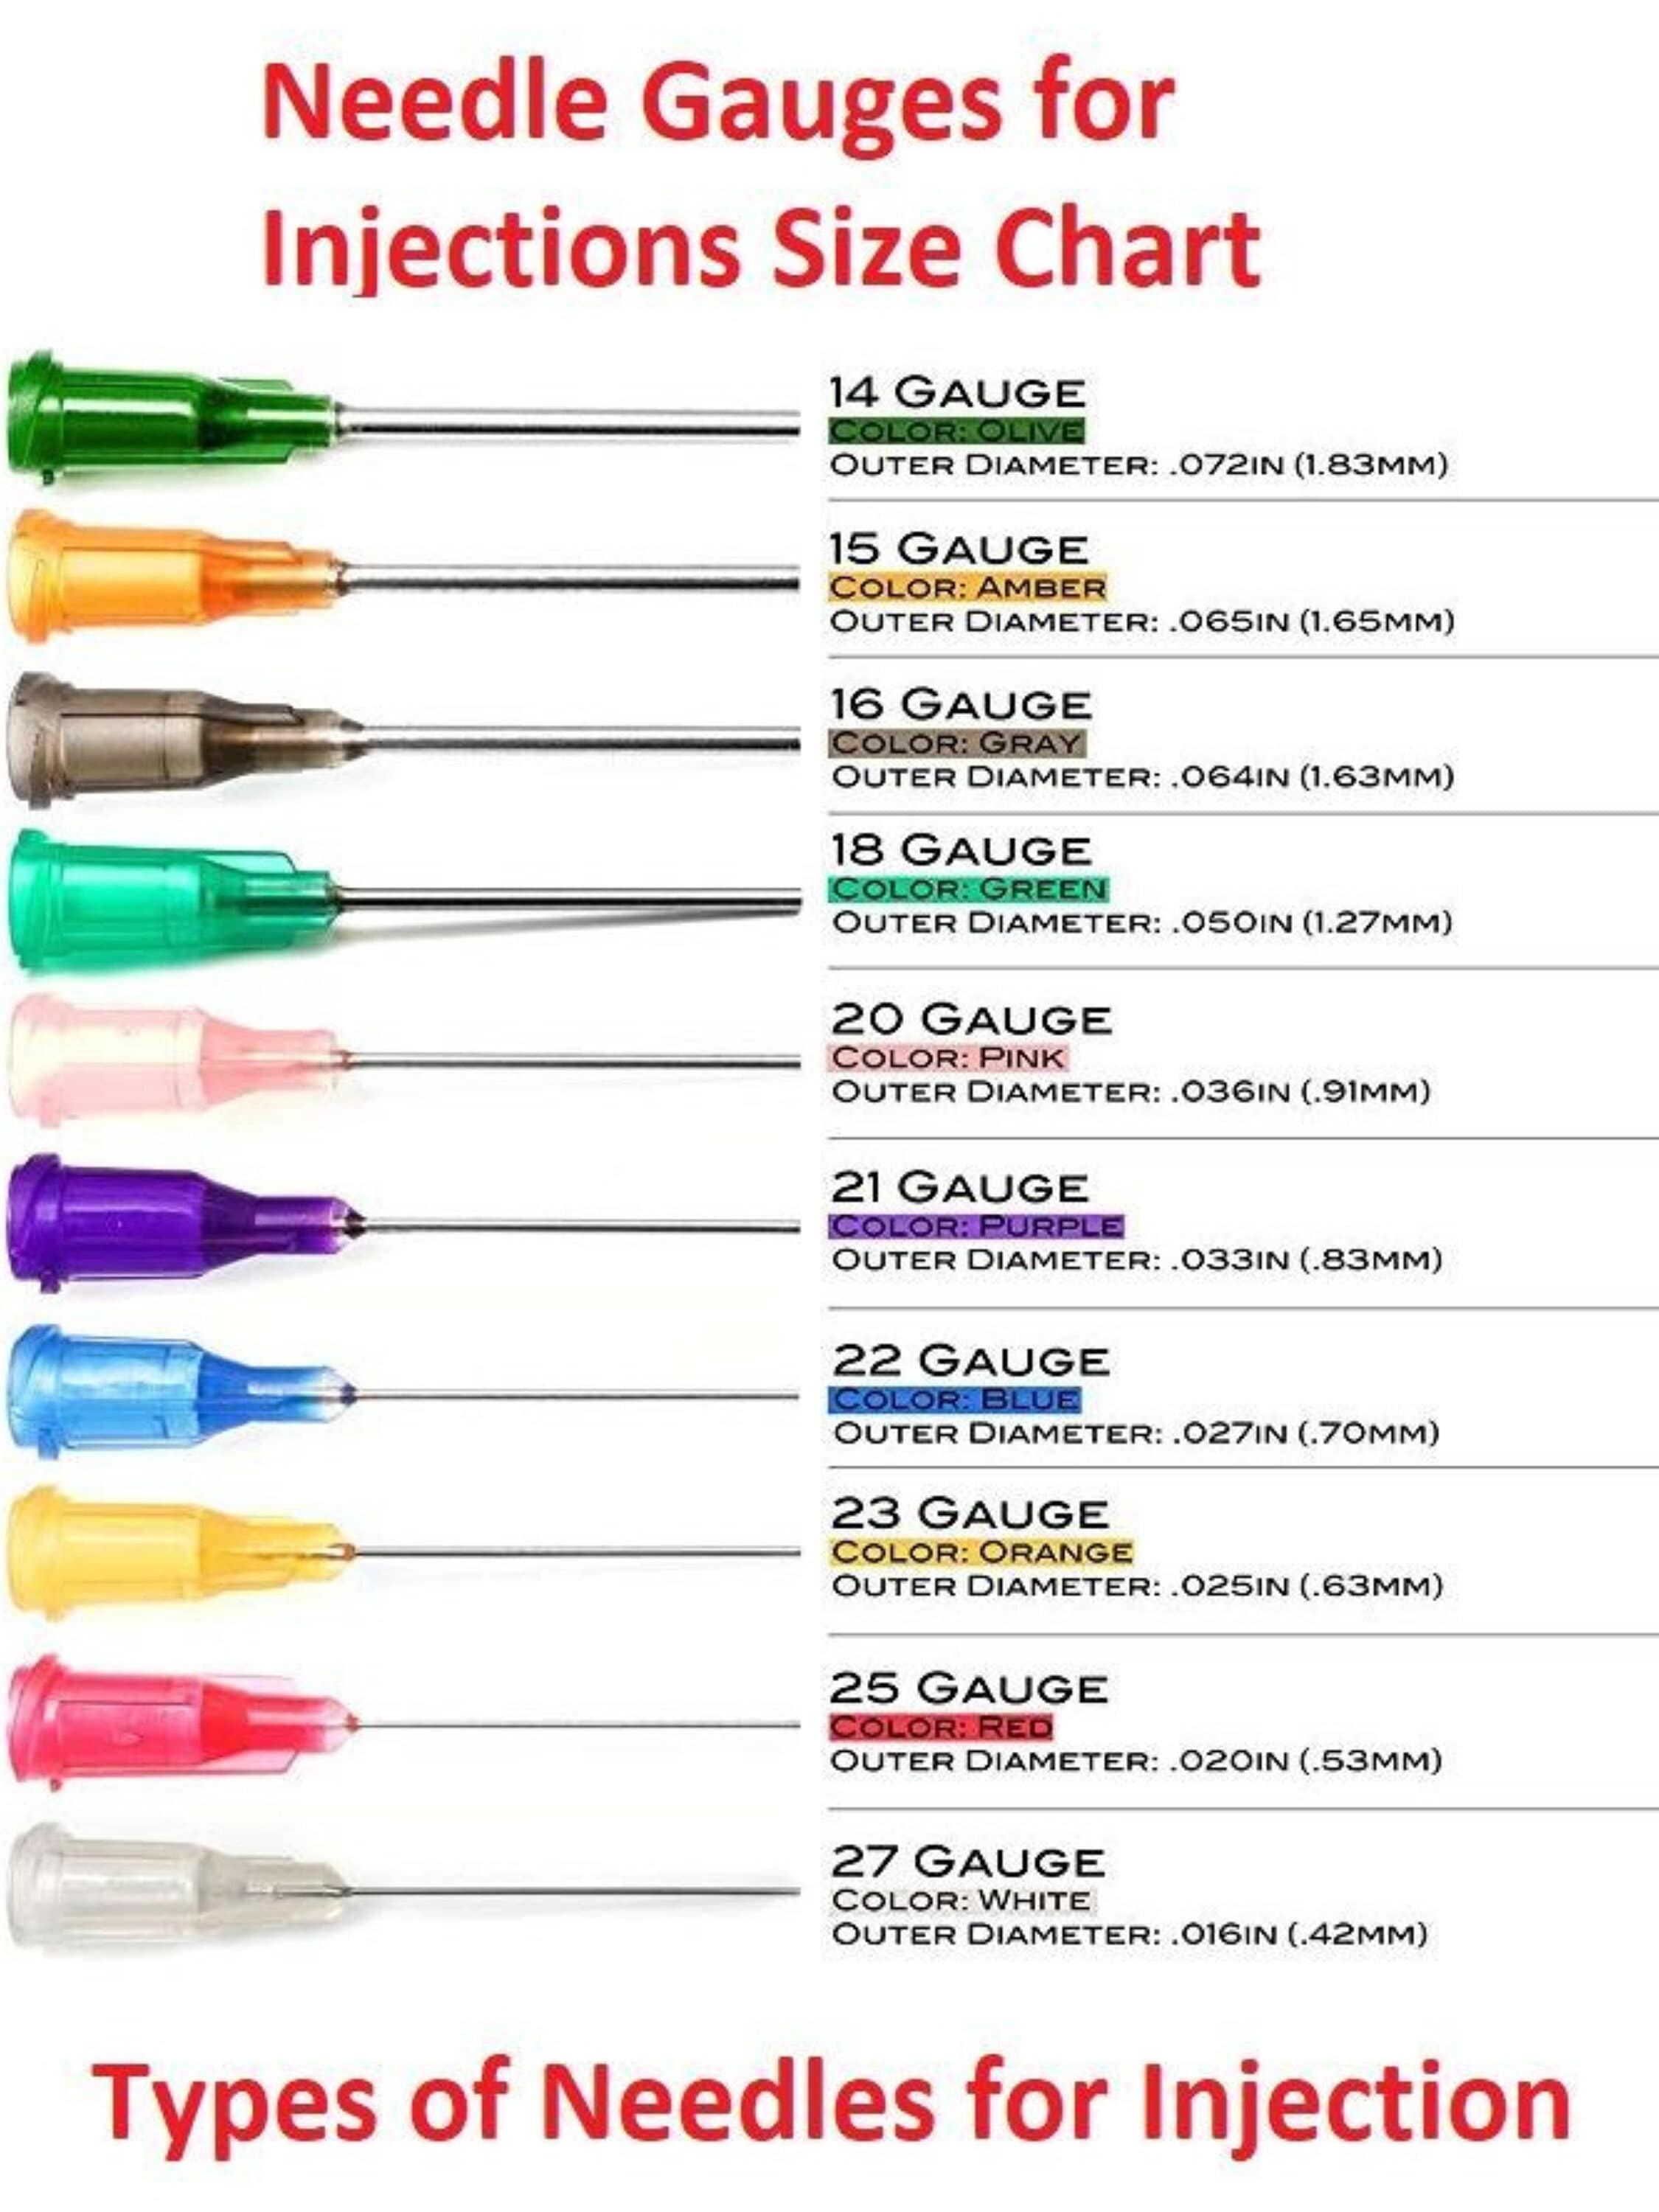 NEEDLE GAUGES For INJECTIONS Size Chart